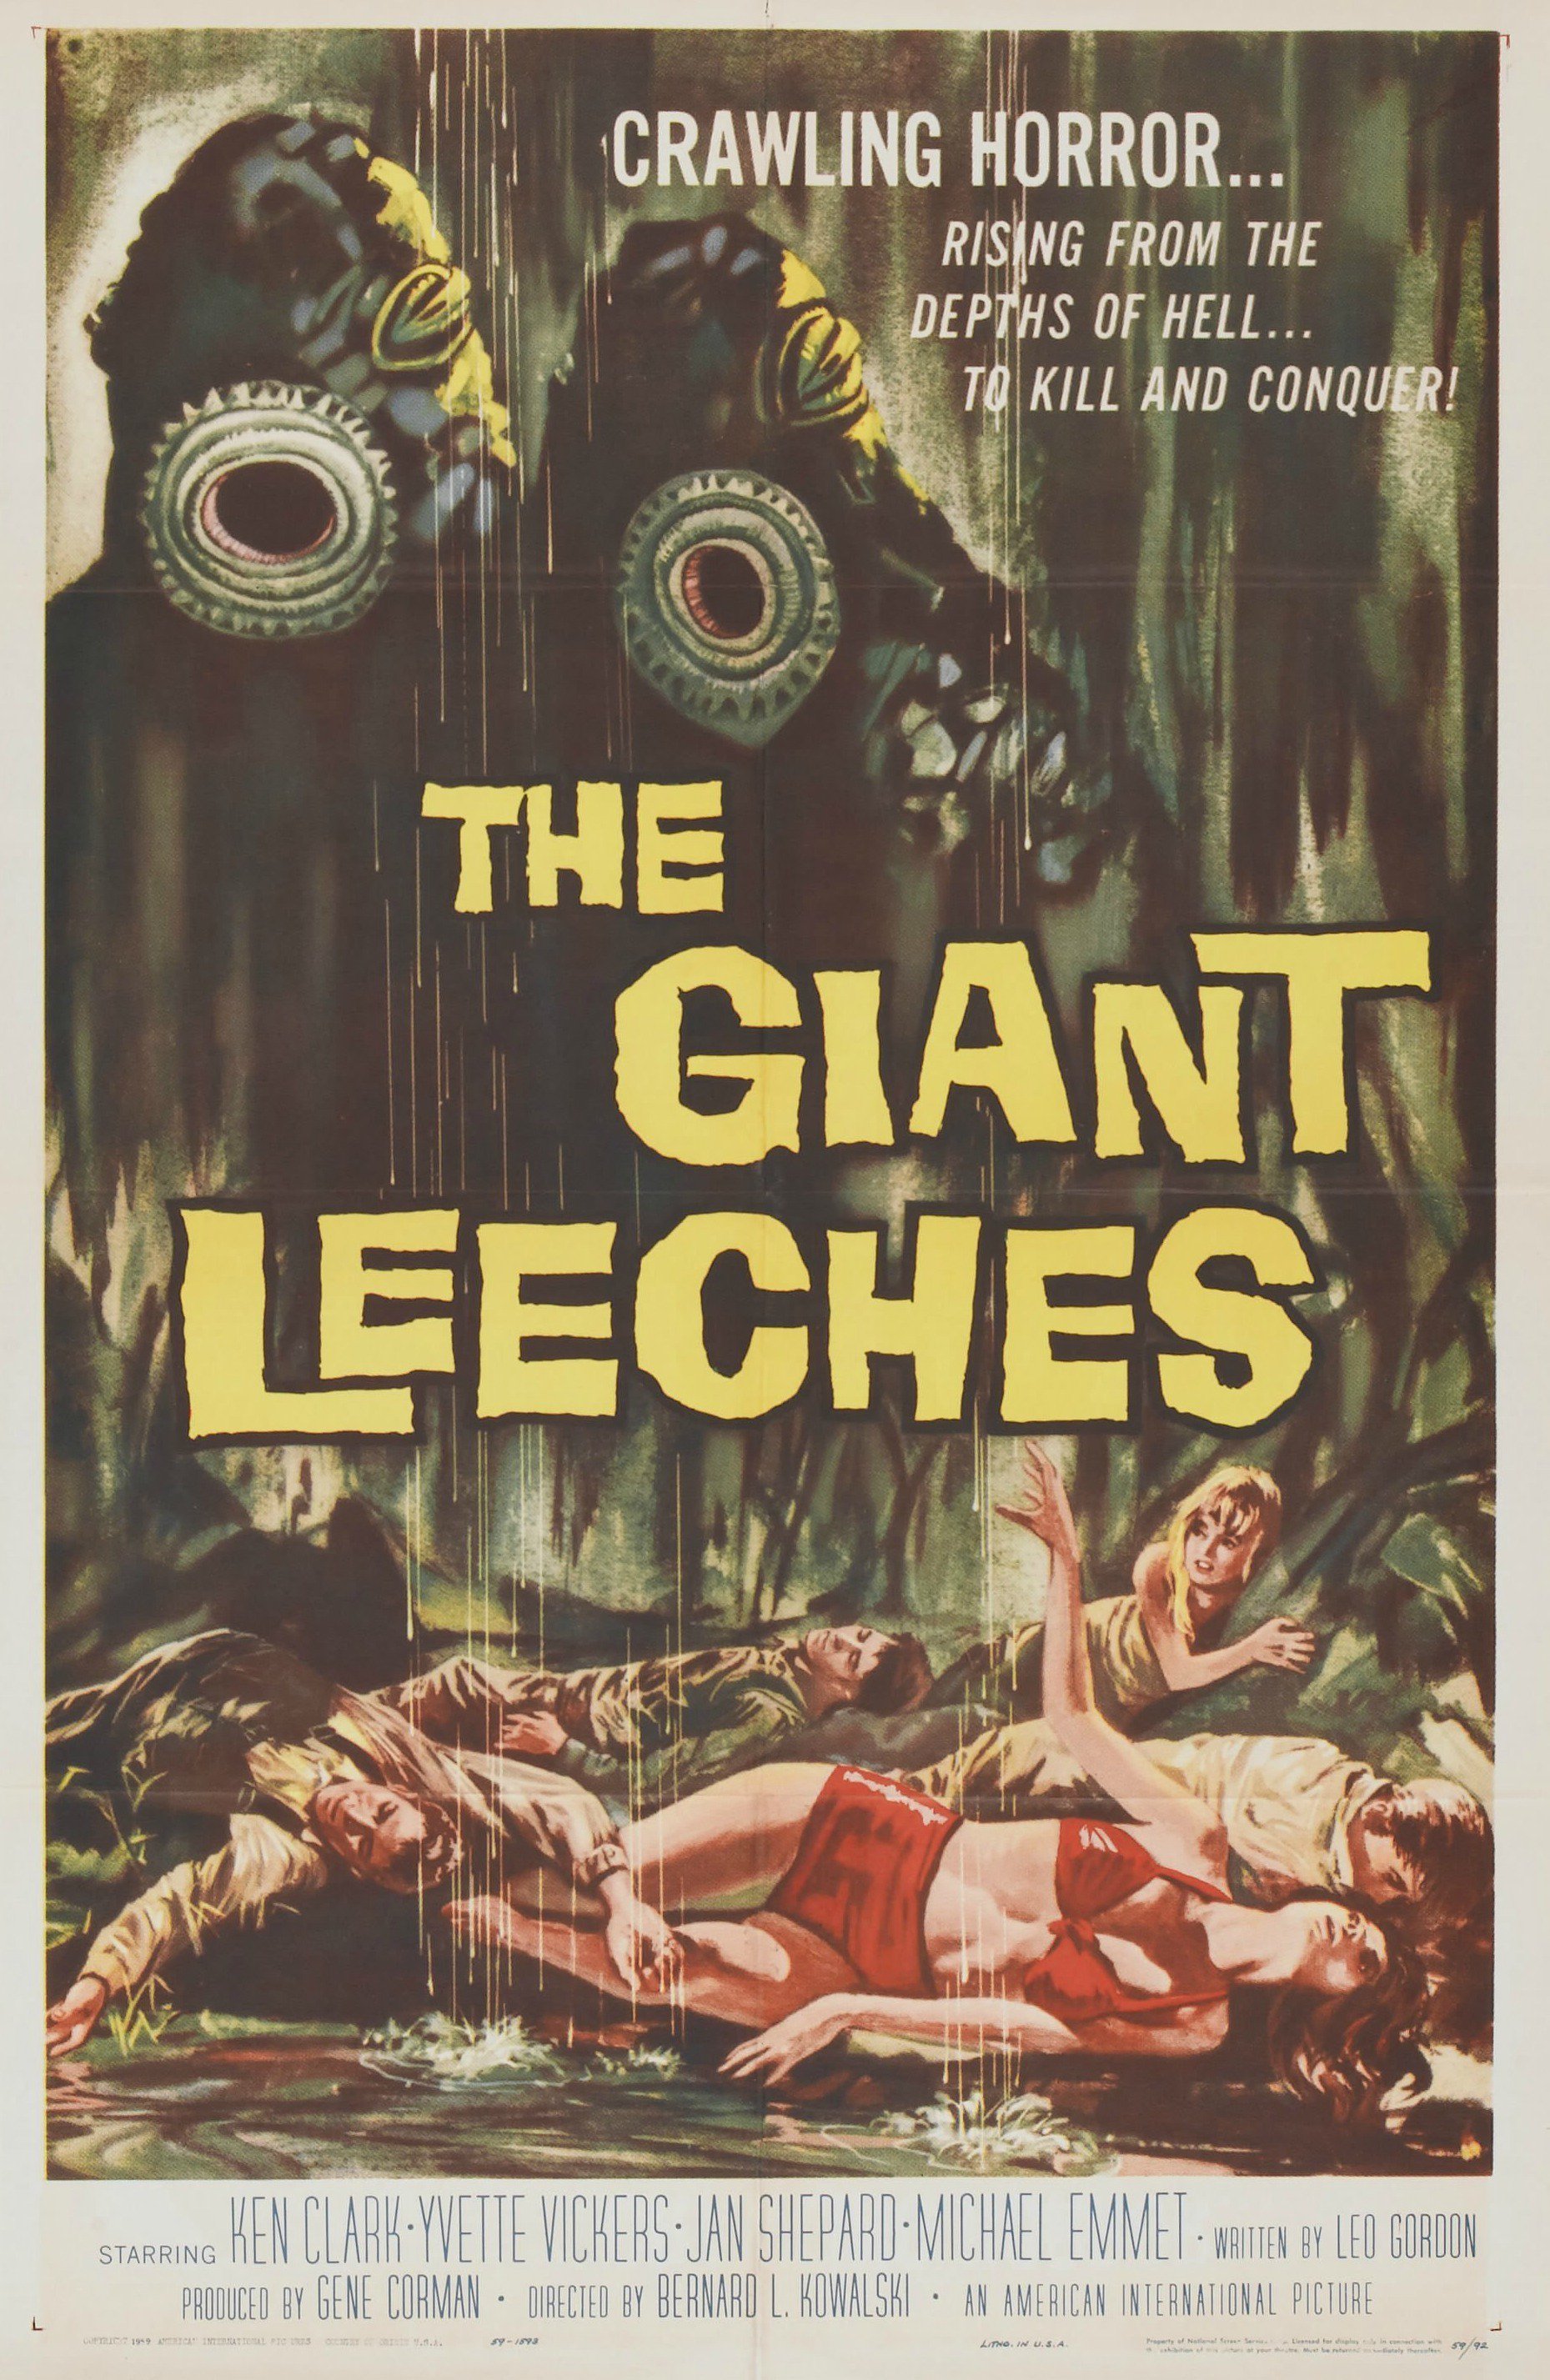 Poster for the movie "Attack of the Giant Leeches"